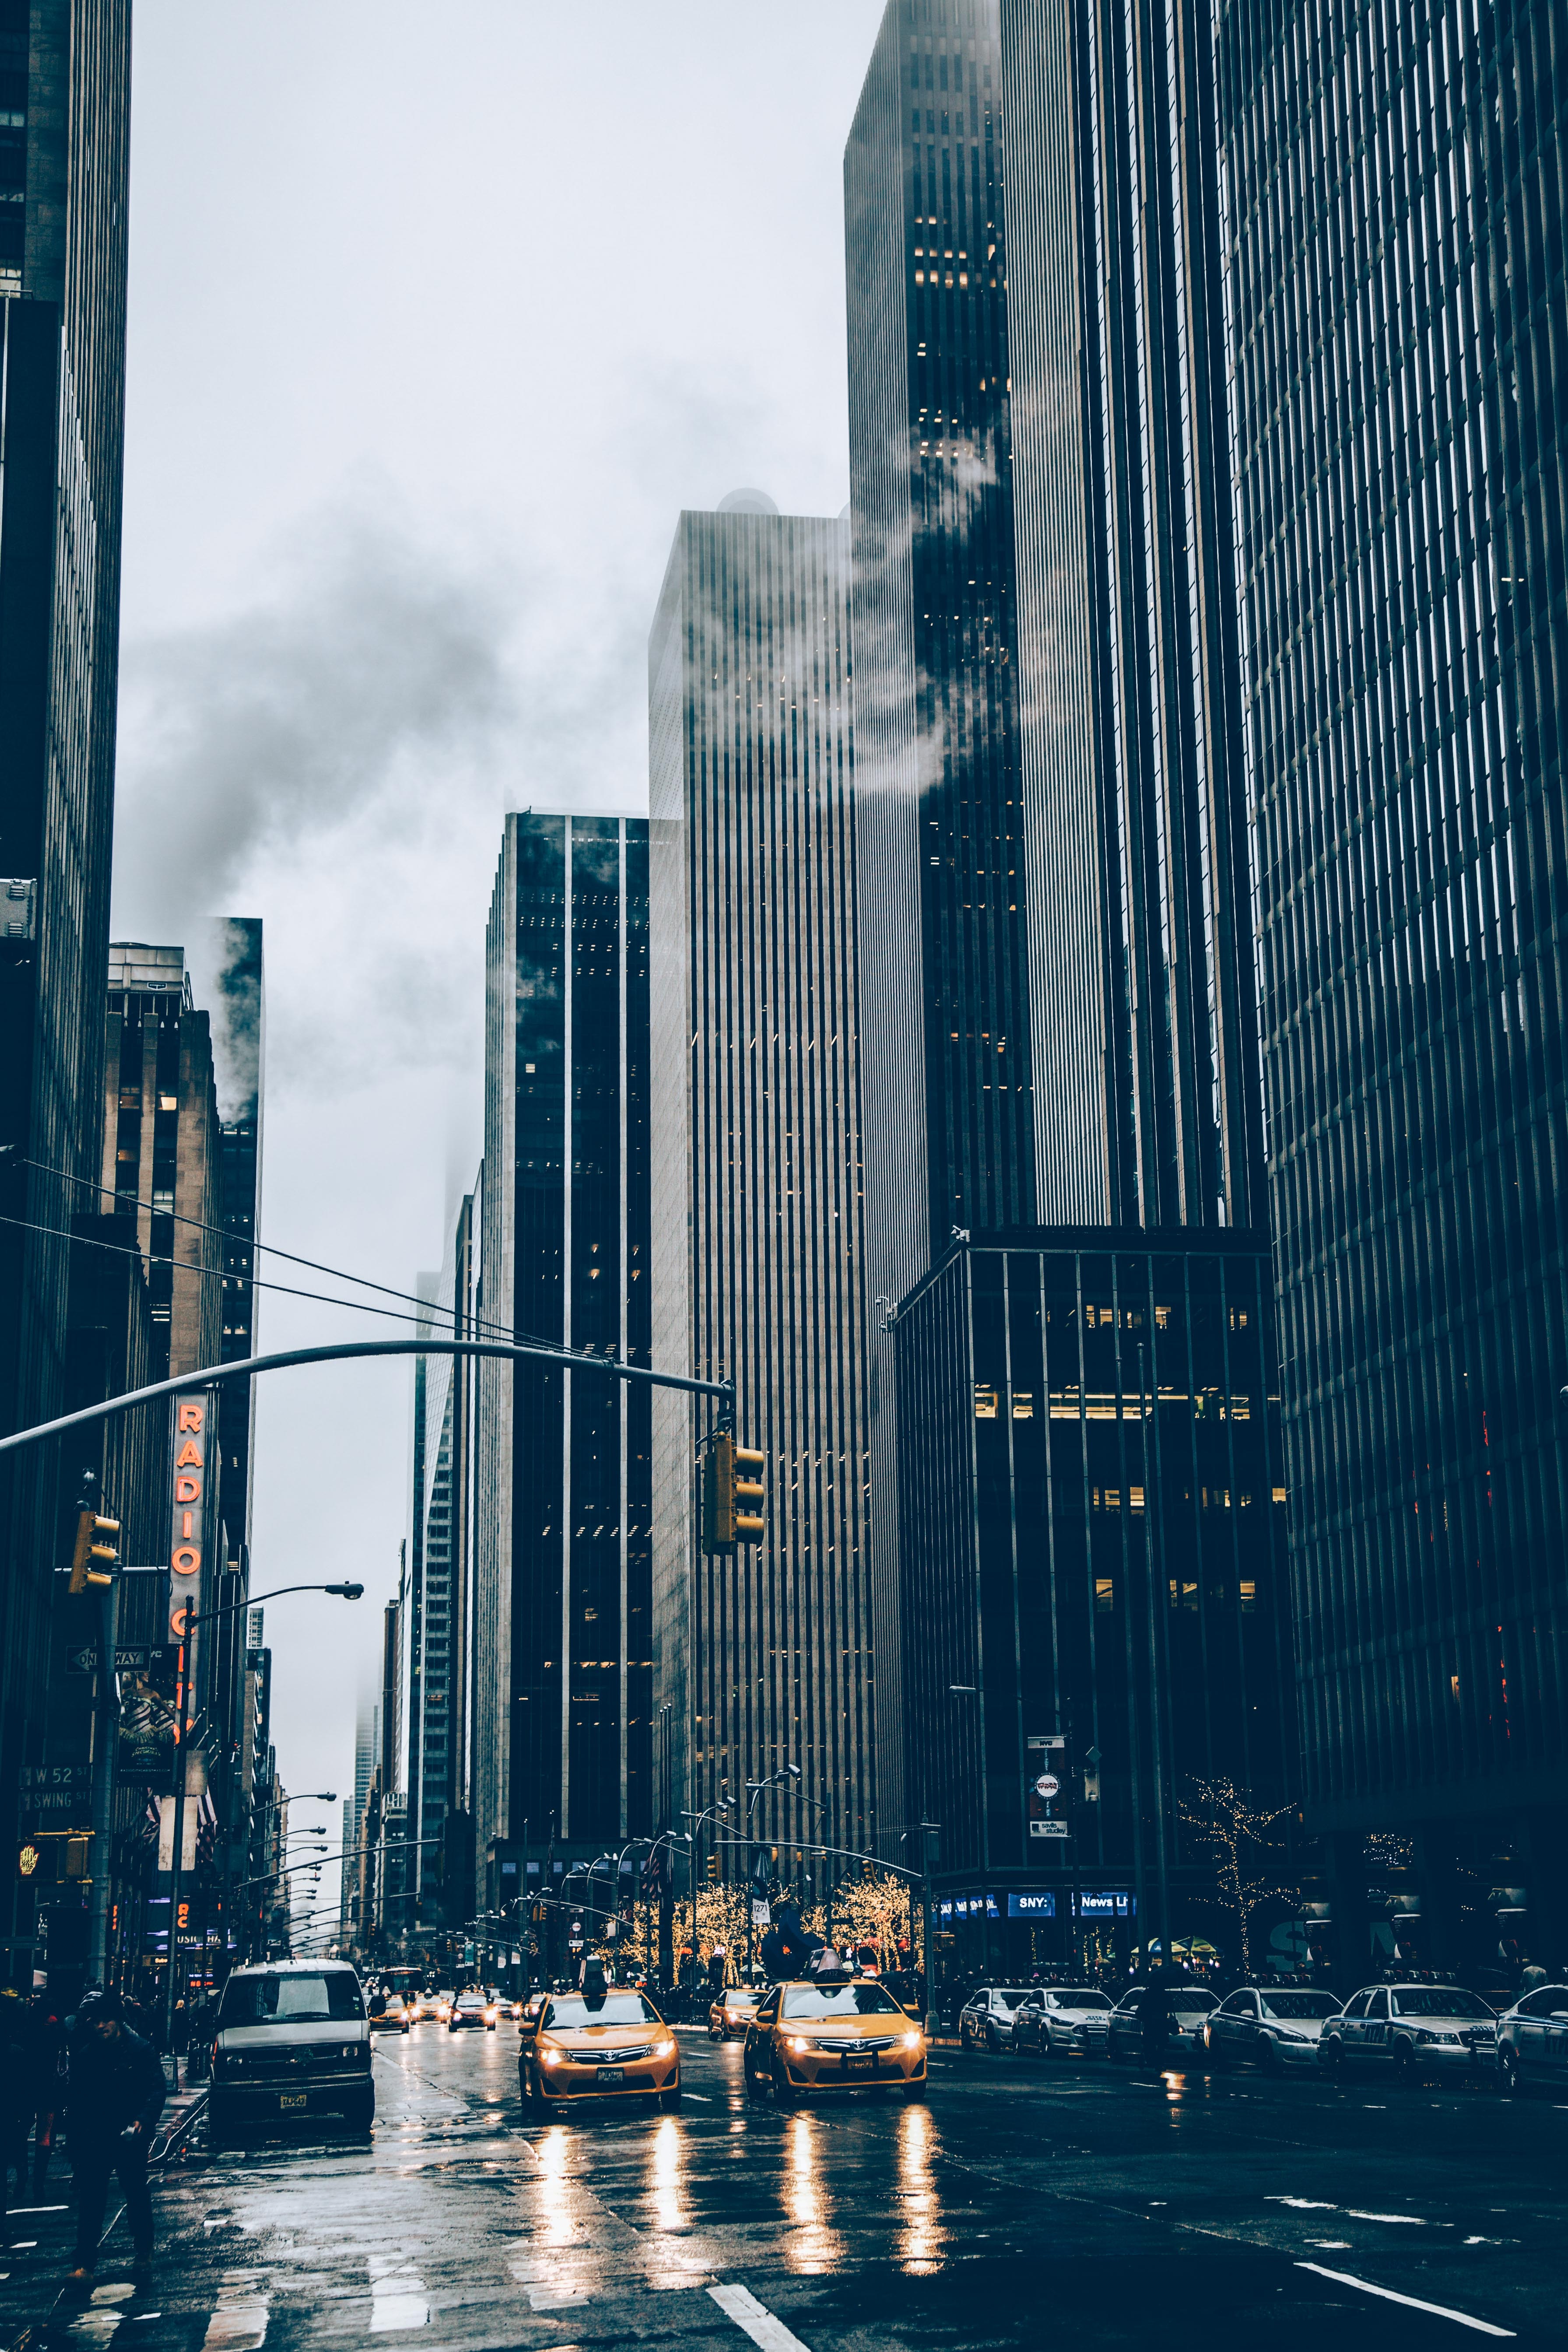 usa, traffic, megapolis, united states, cities, cars, road, movement, megalopolis, mainly cloudy, overcast, new york